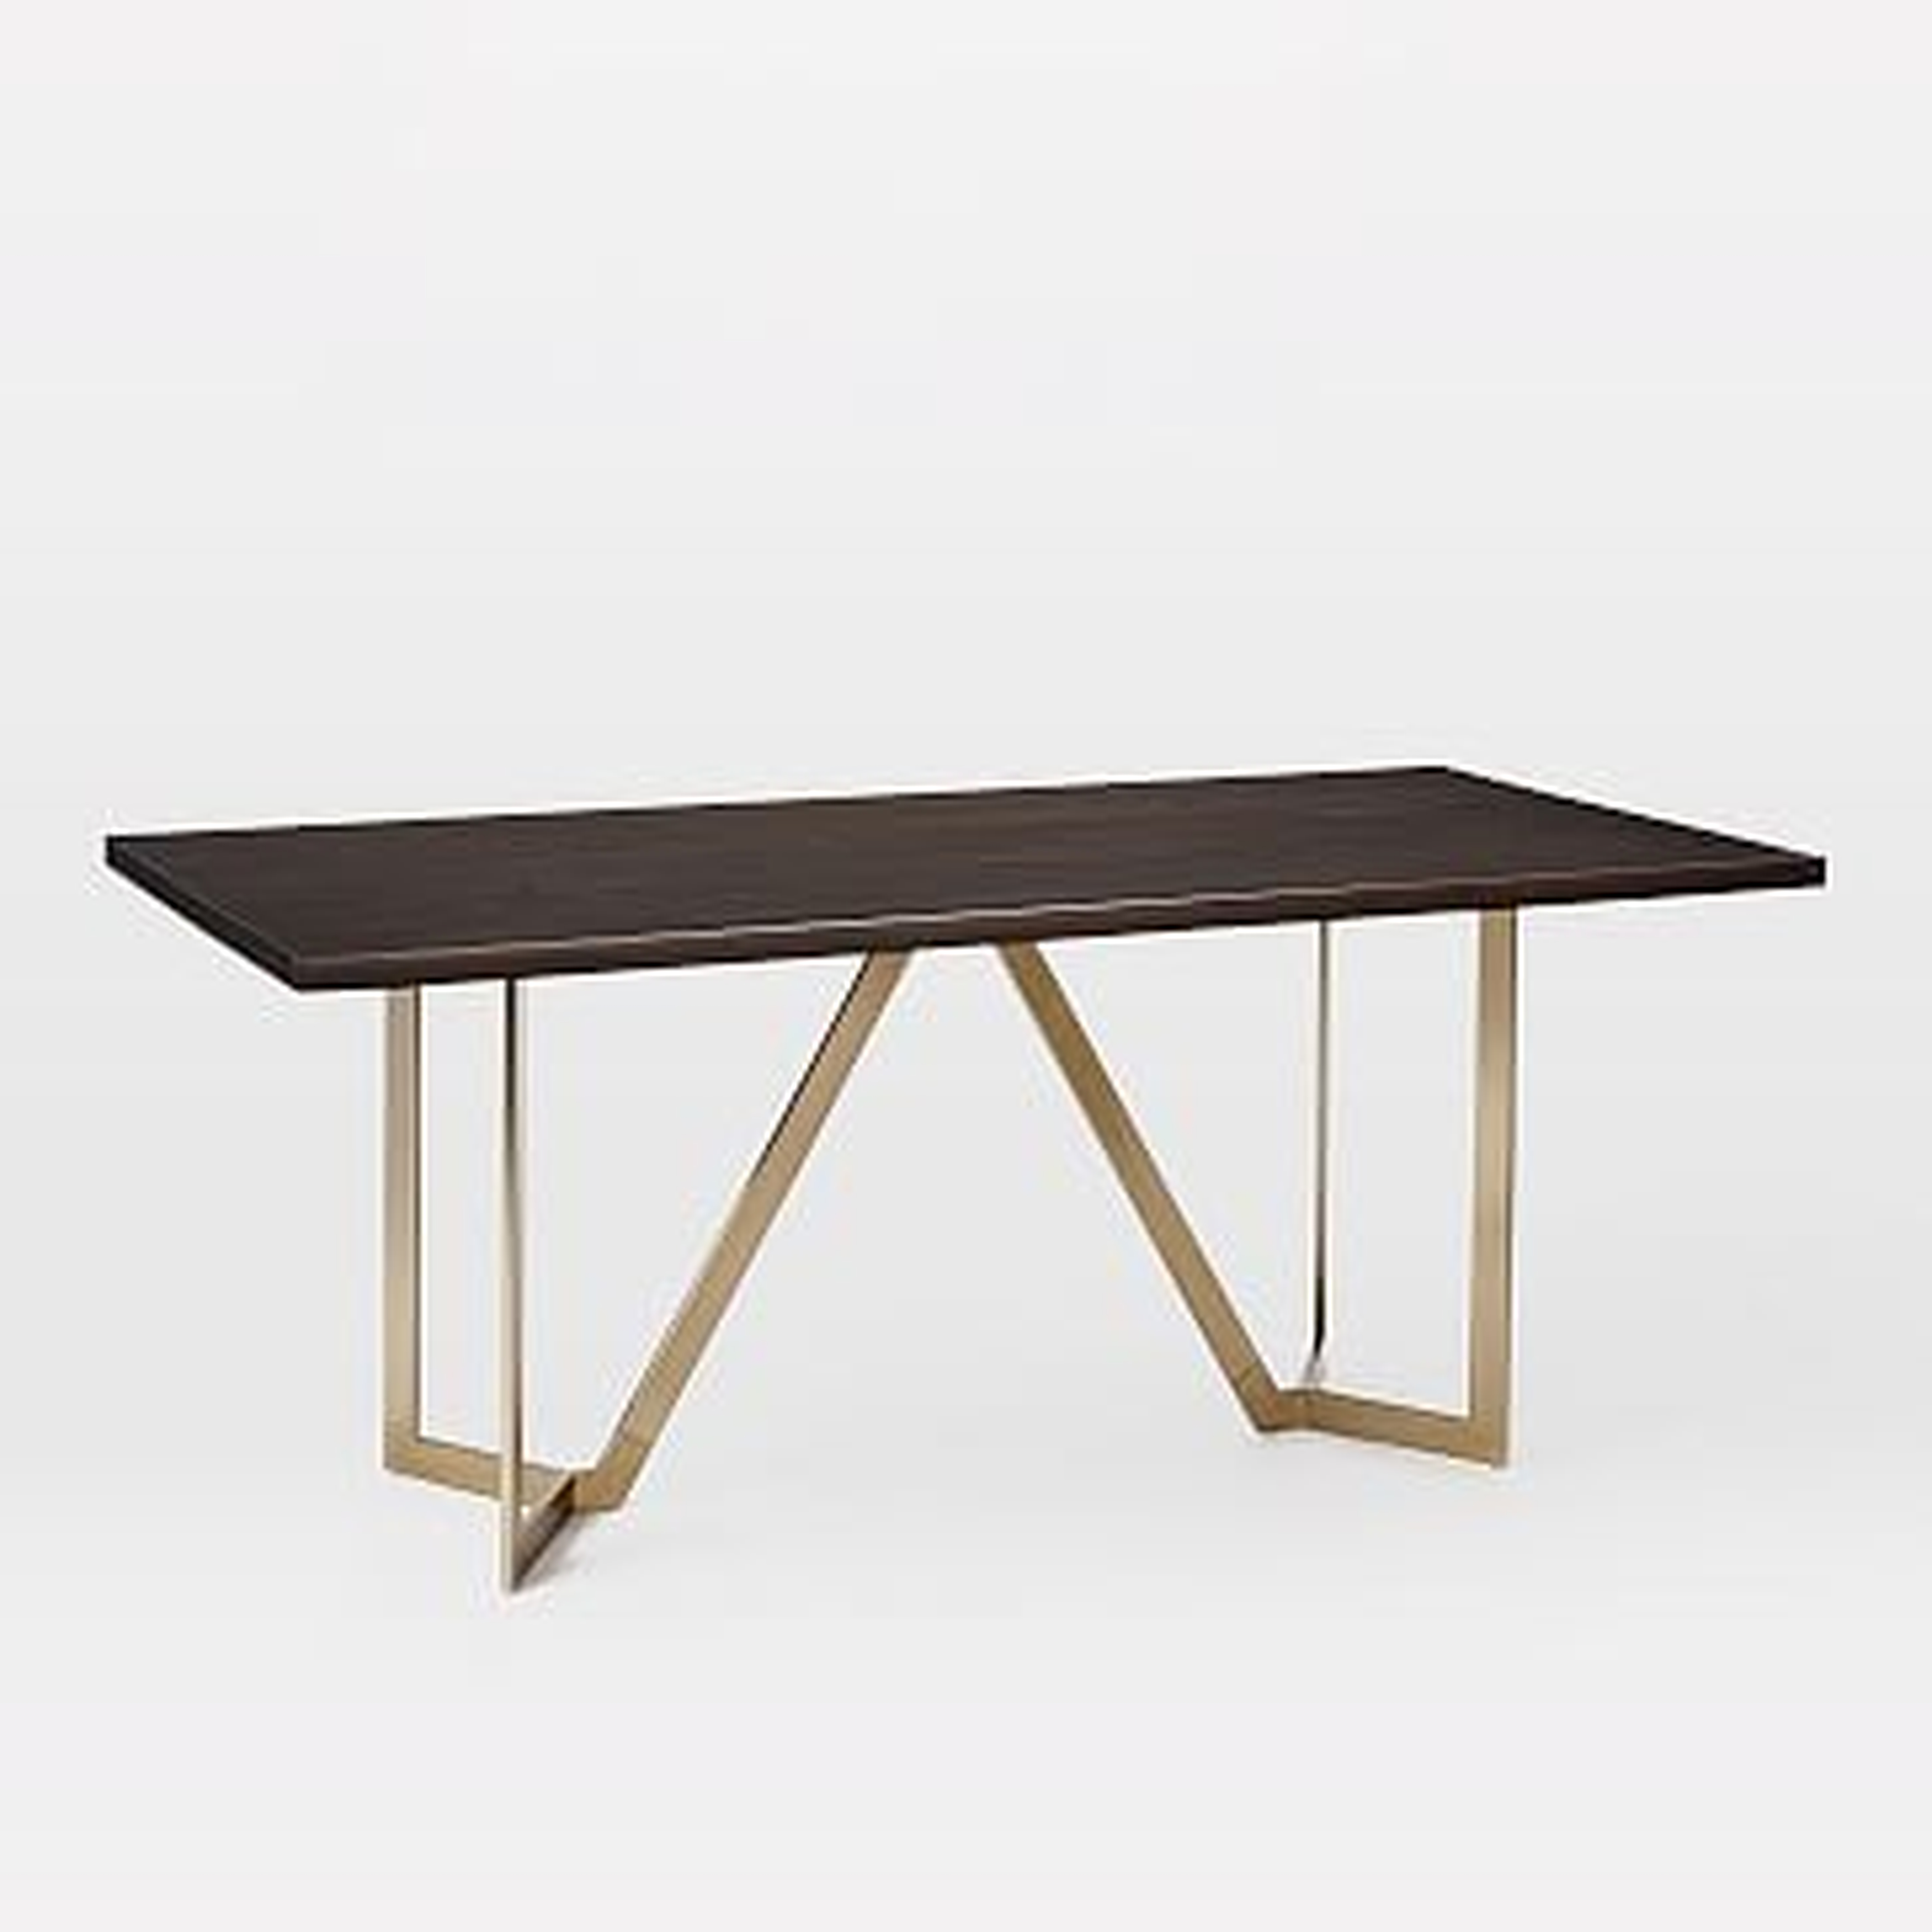 Tower Dining Table 72" Mahogony, Dark Mineral/Antique Brass - West Elm